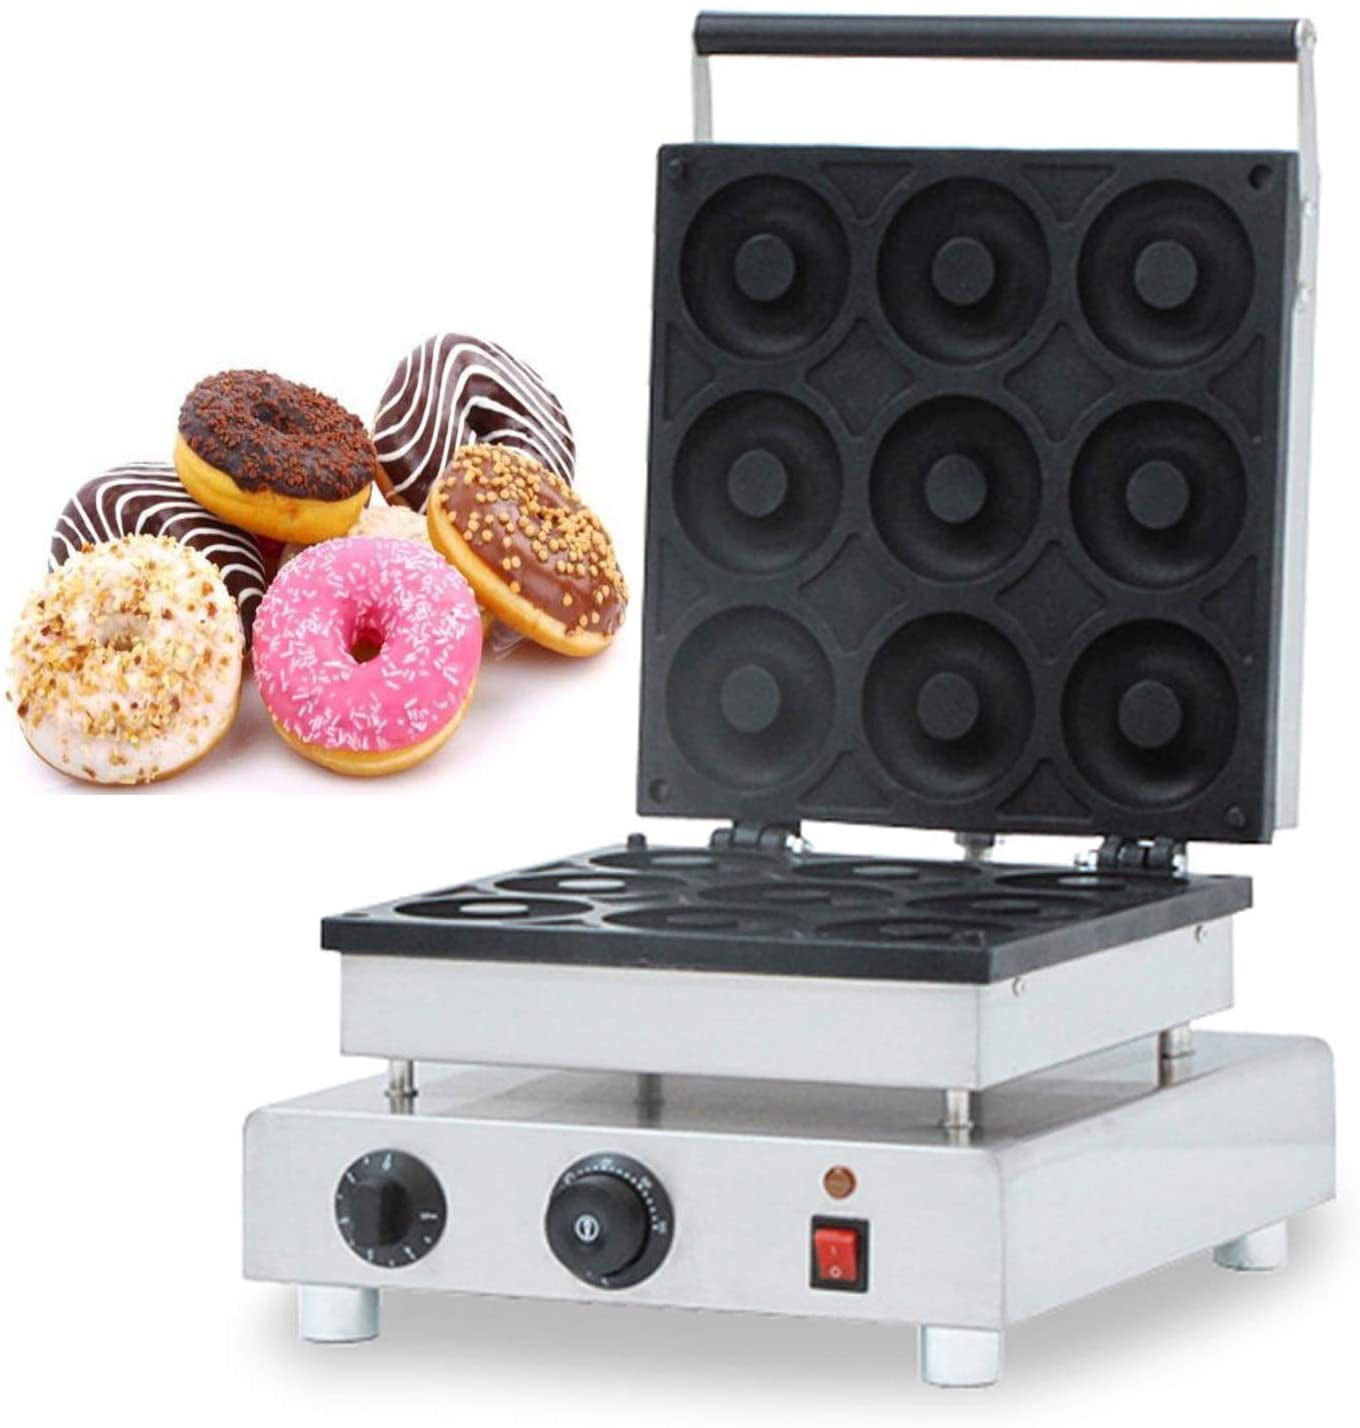 Stainless Steel Body,1650W 220V. Donut Maker Machine Upgrade-Commercial Electric Doughnut Machine with 15 Holes Pan,Small/Mini Non-Stick Donut Backer Machine for Supermarket,Bakery,Snack Bar 